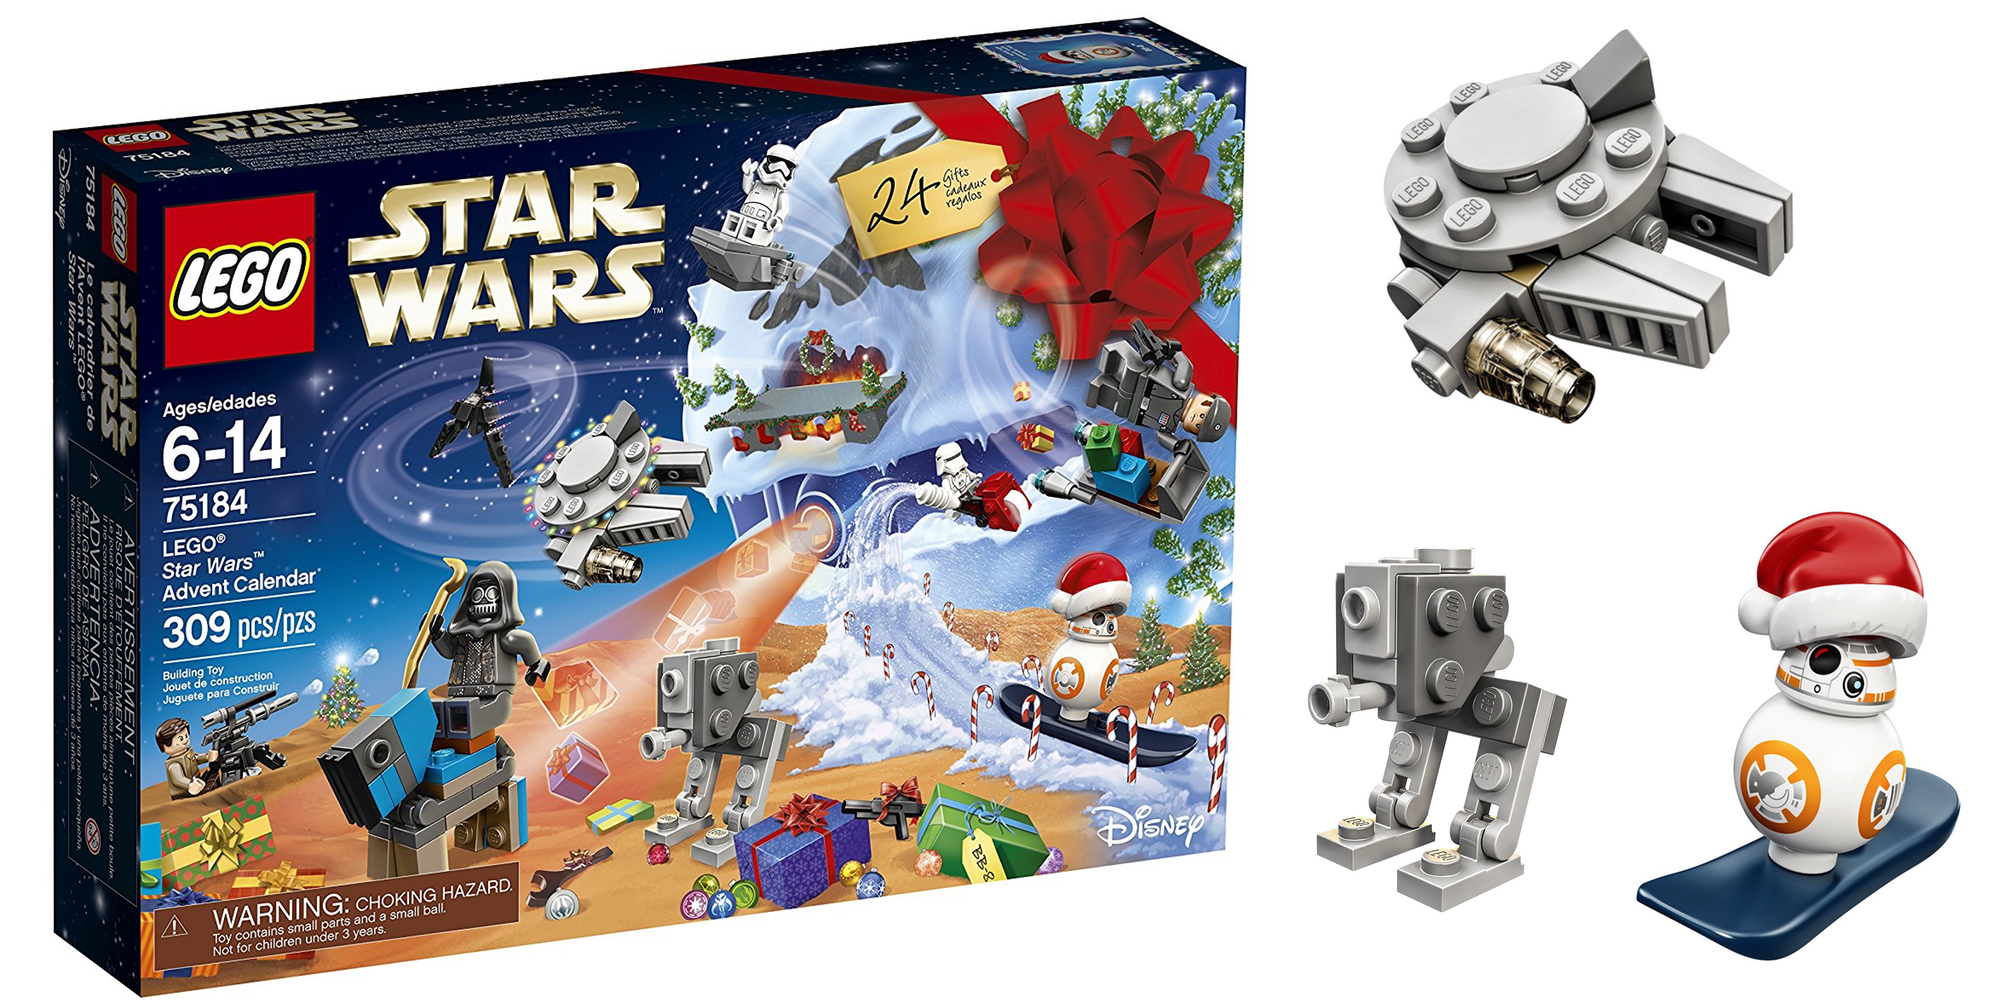 LEGO Star Wars Advent Calendar has dropped to a new all time low at $29 50